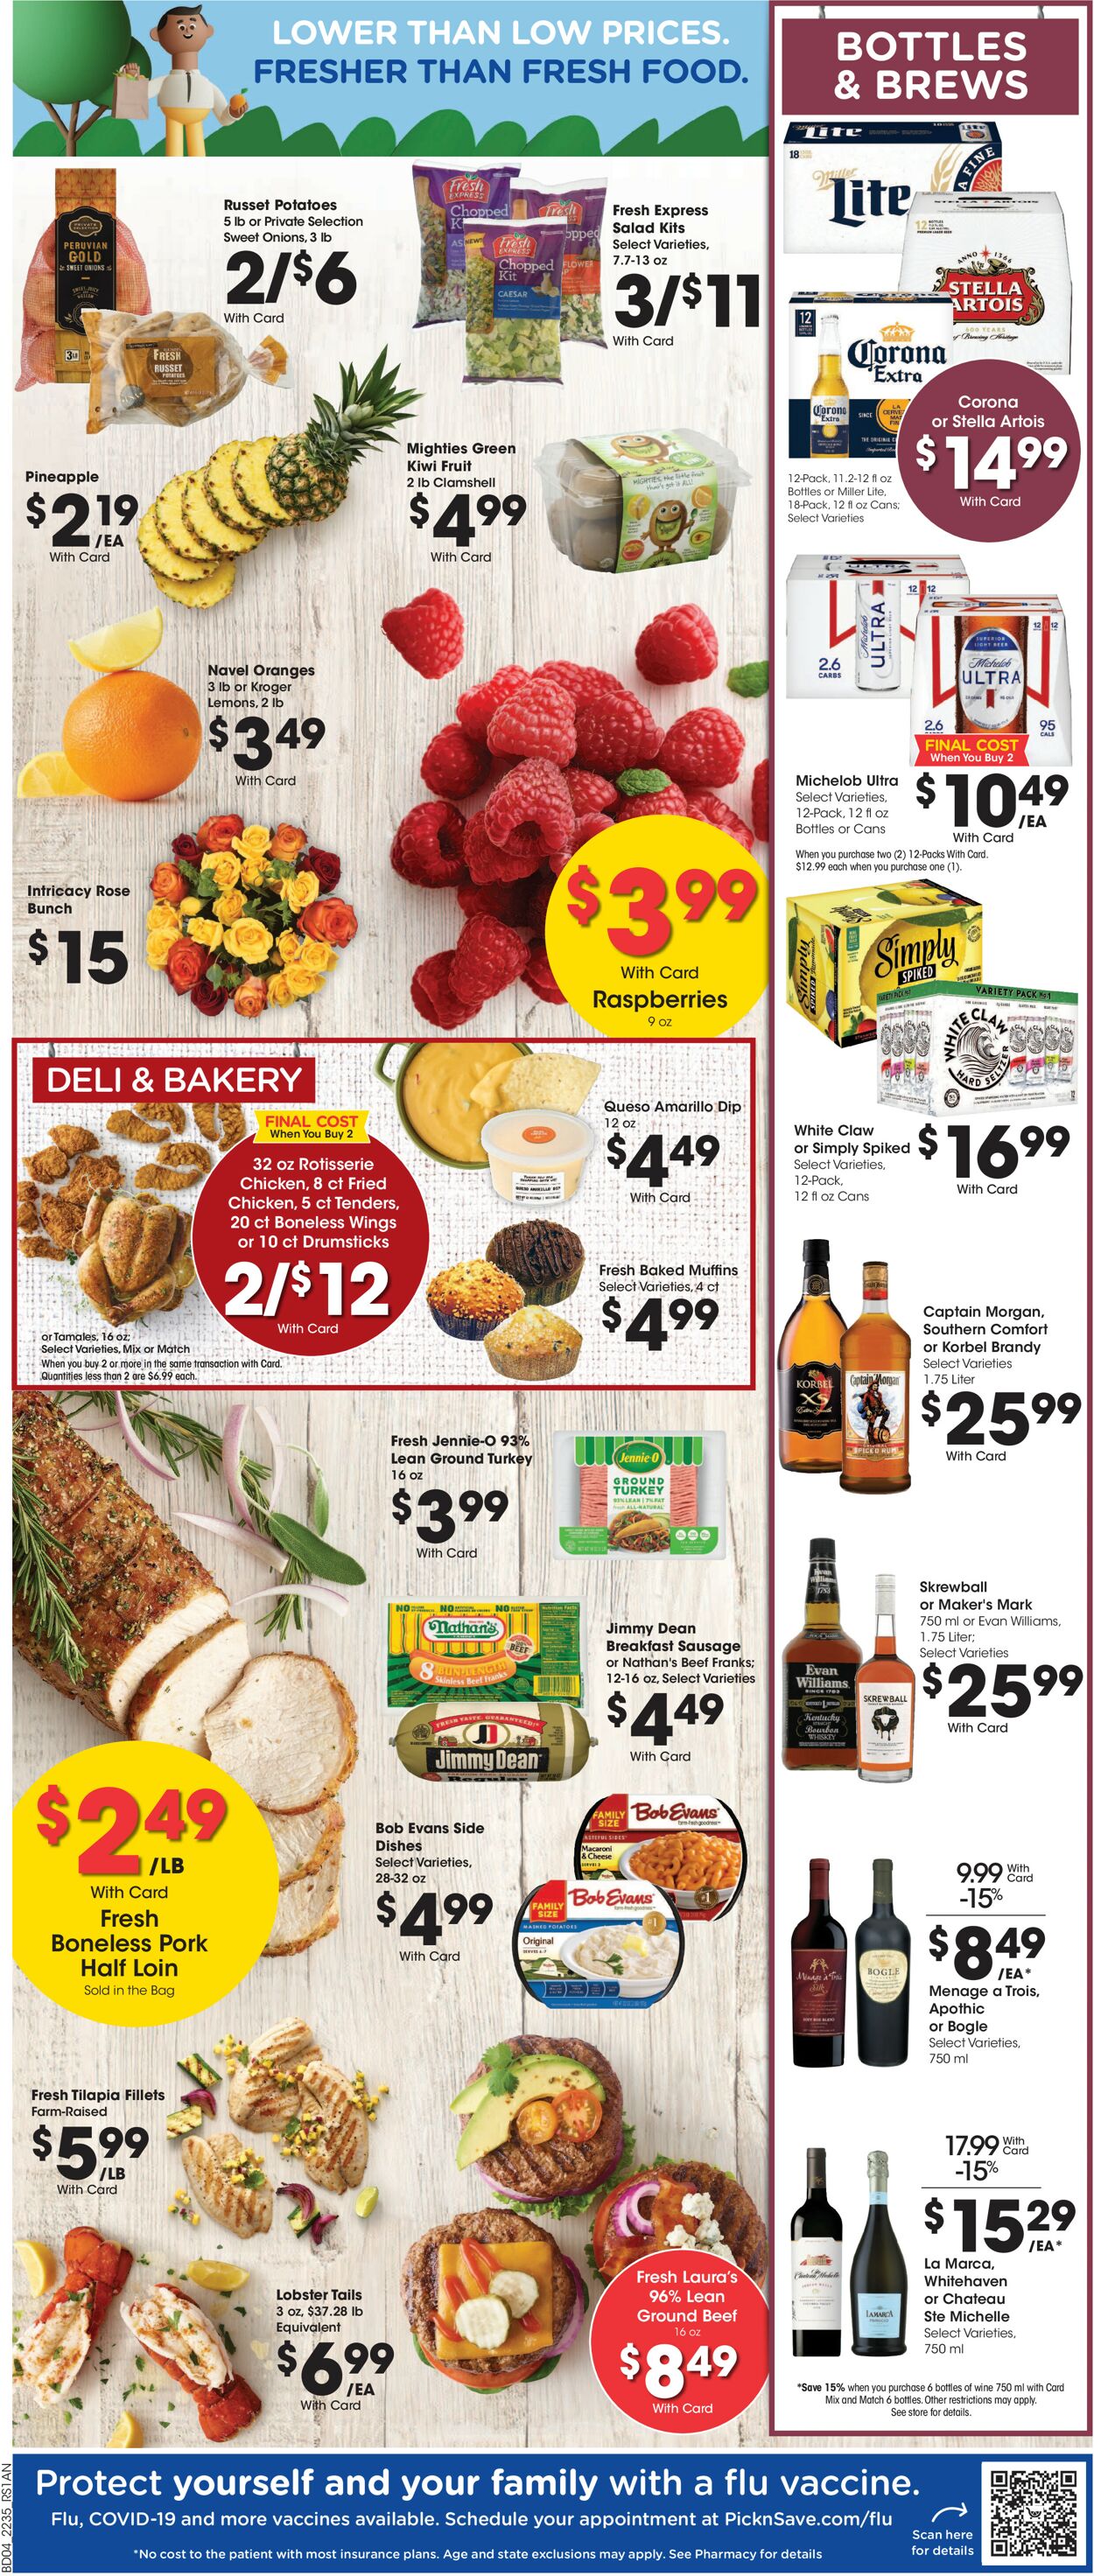 Pick ‘n Save Ad from 09/28/2022